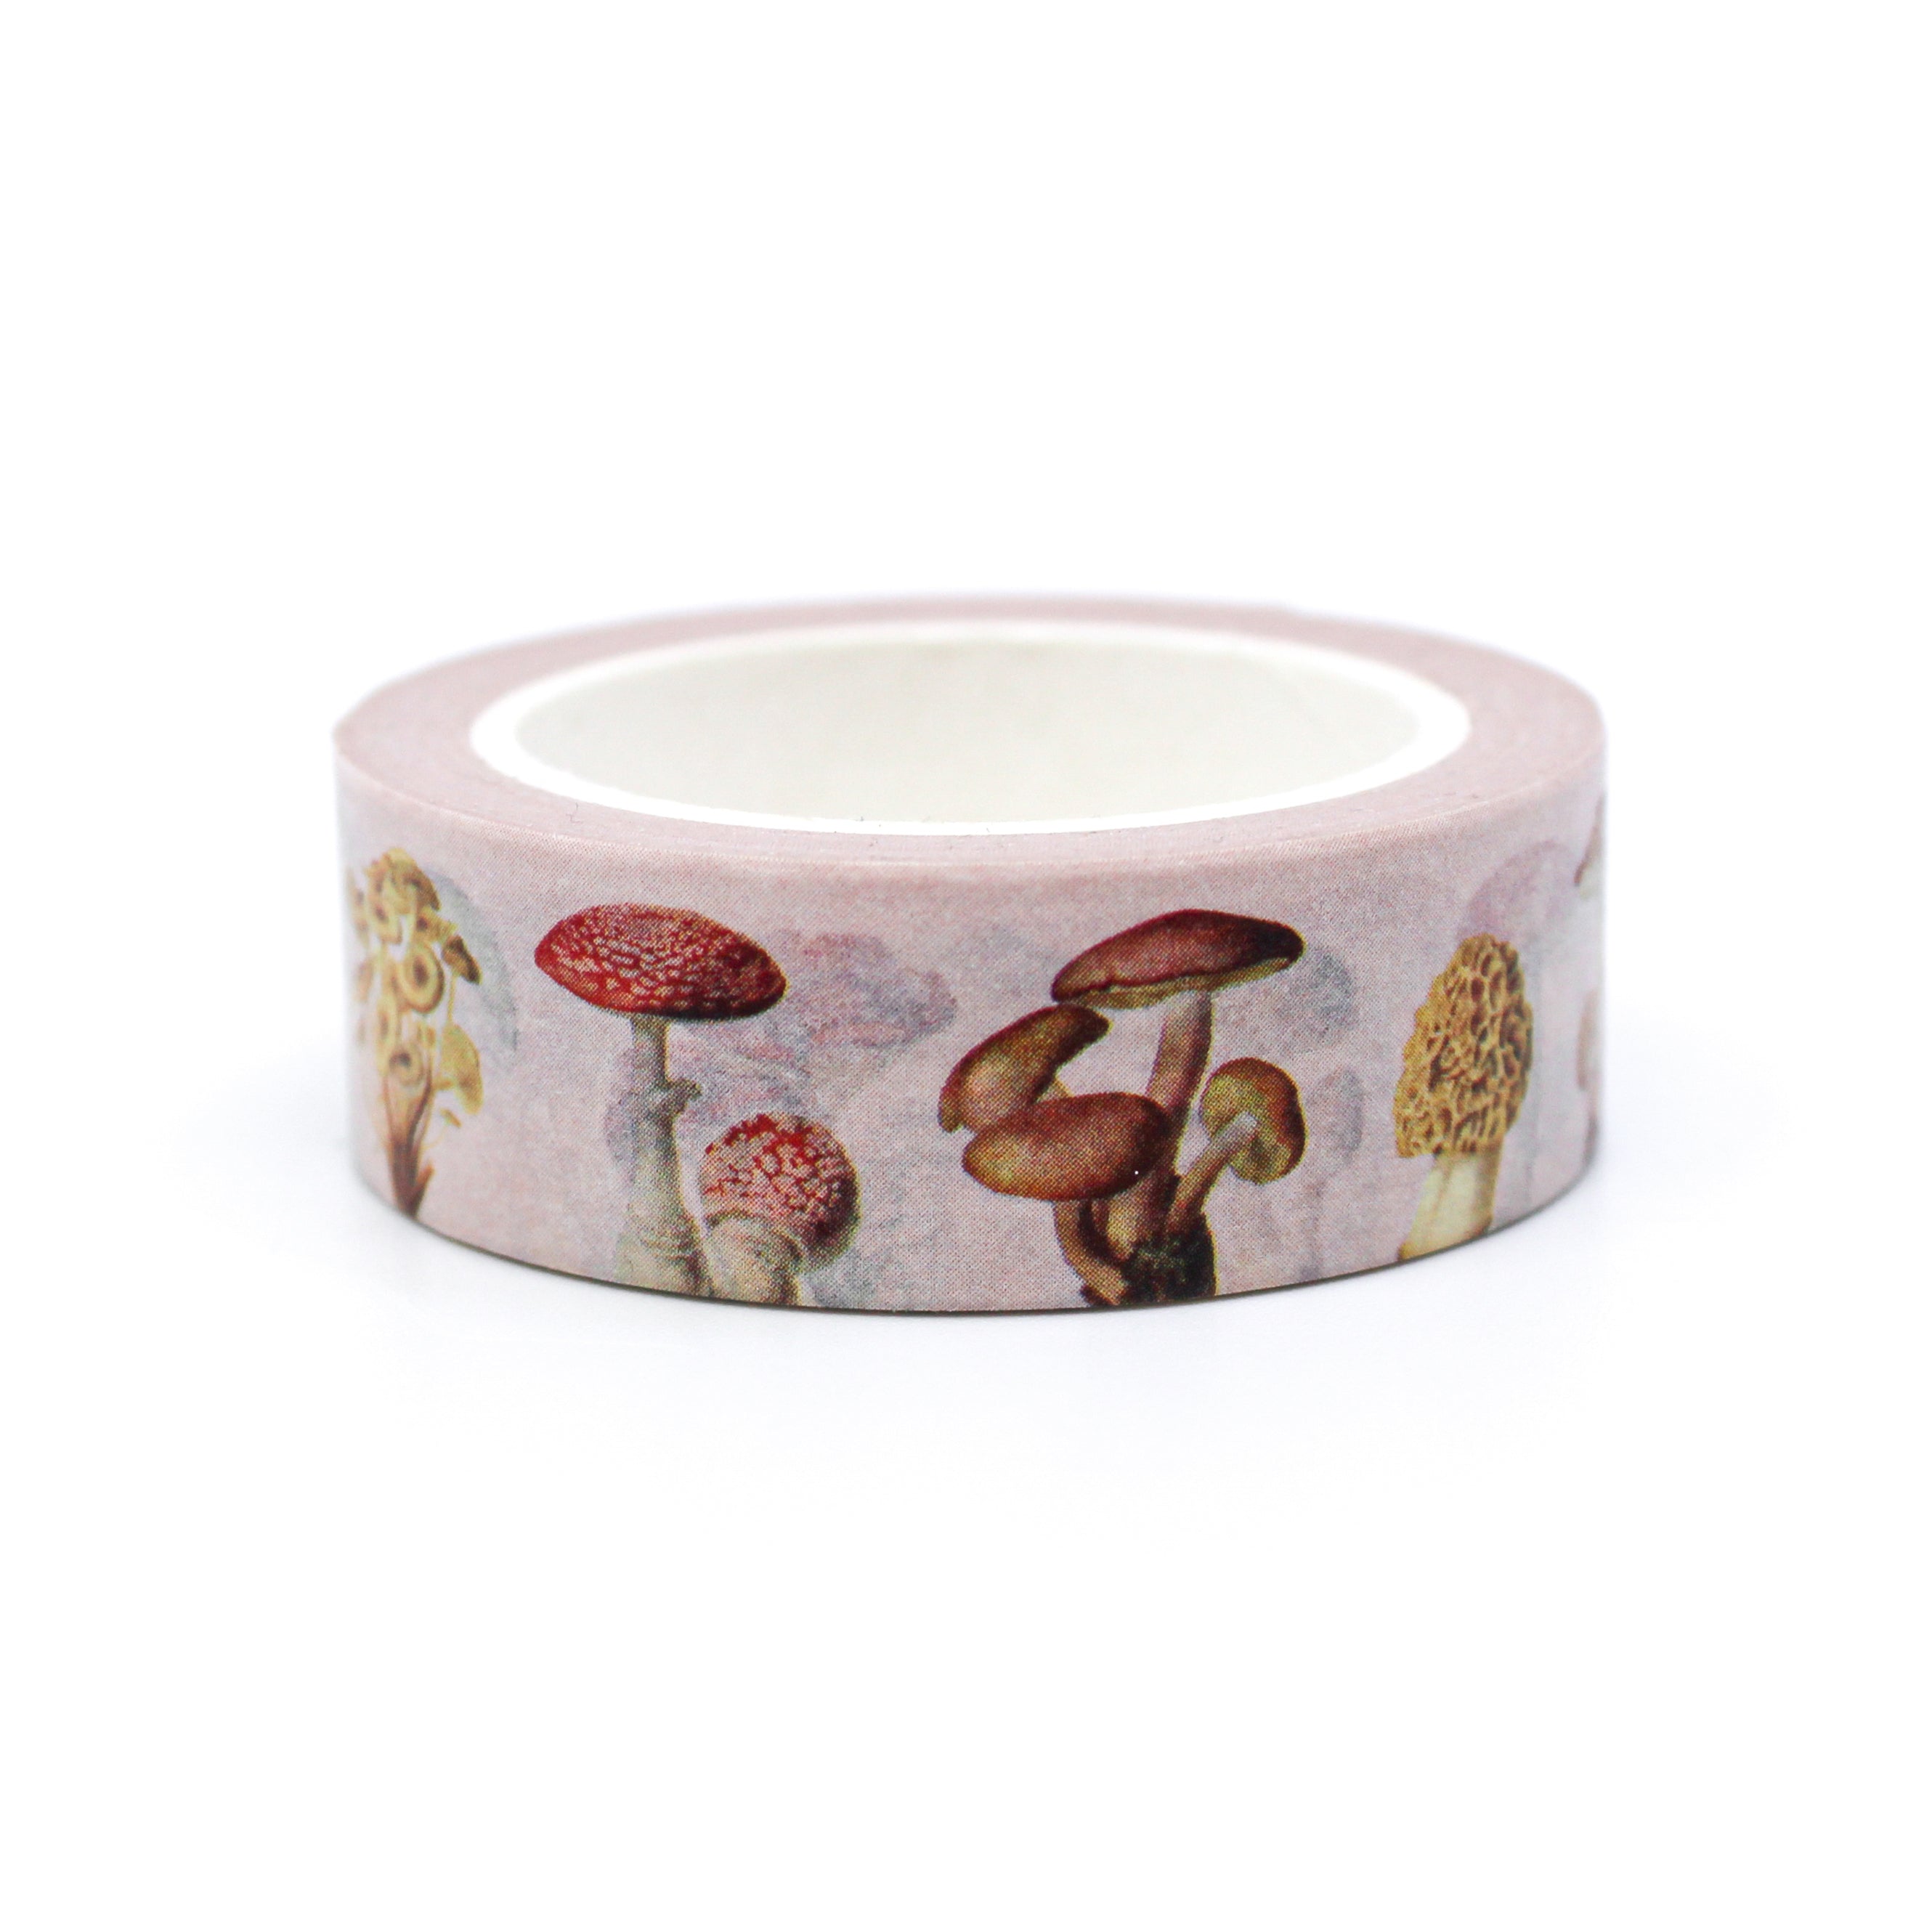 This is colorful view of forest whimsical mushroom themed washi tape from BBB Supplies Craft Shop